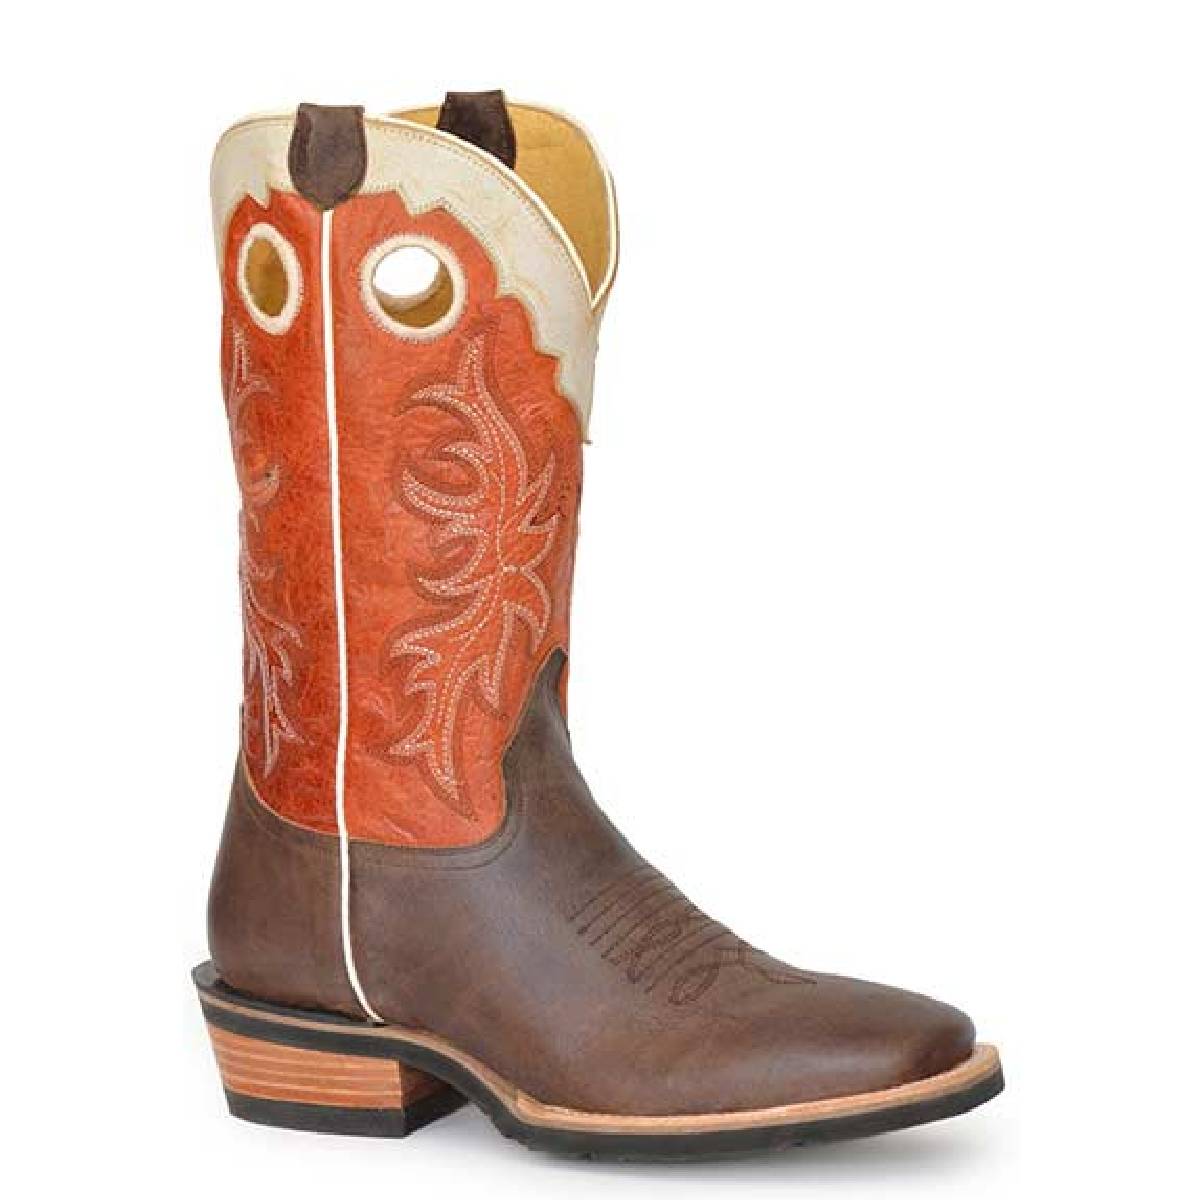 Men's Roper Ride 'Em Cowboy Leather GEO Sole Boots Handcrafted Brown - yeehawcowboy